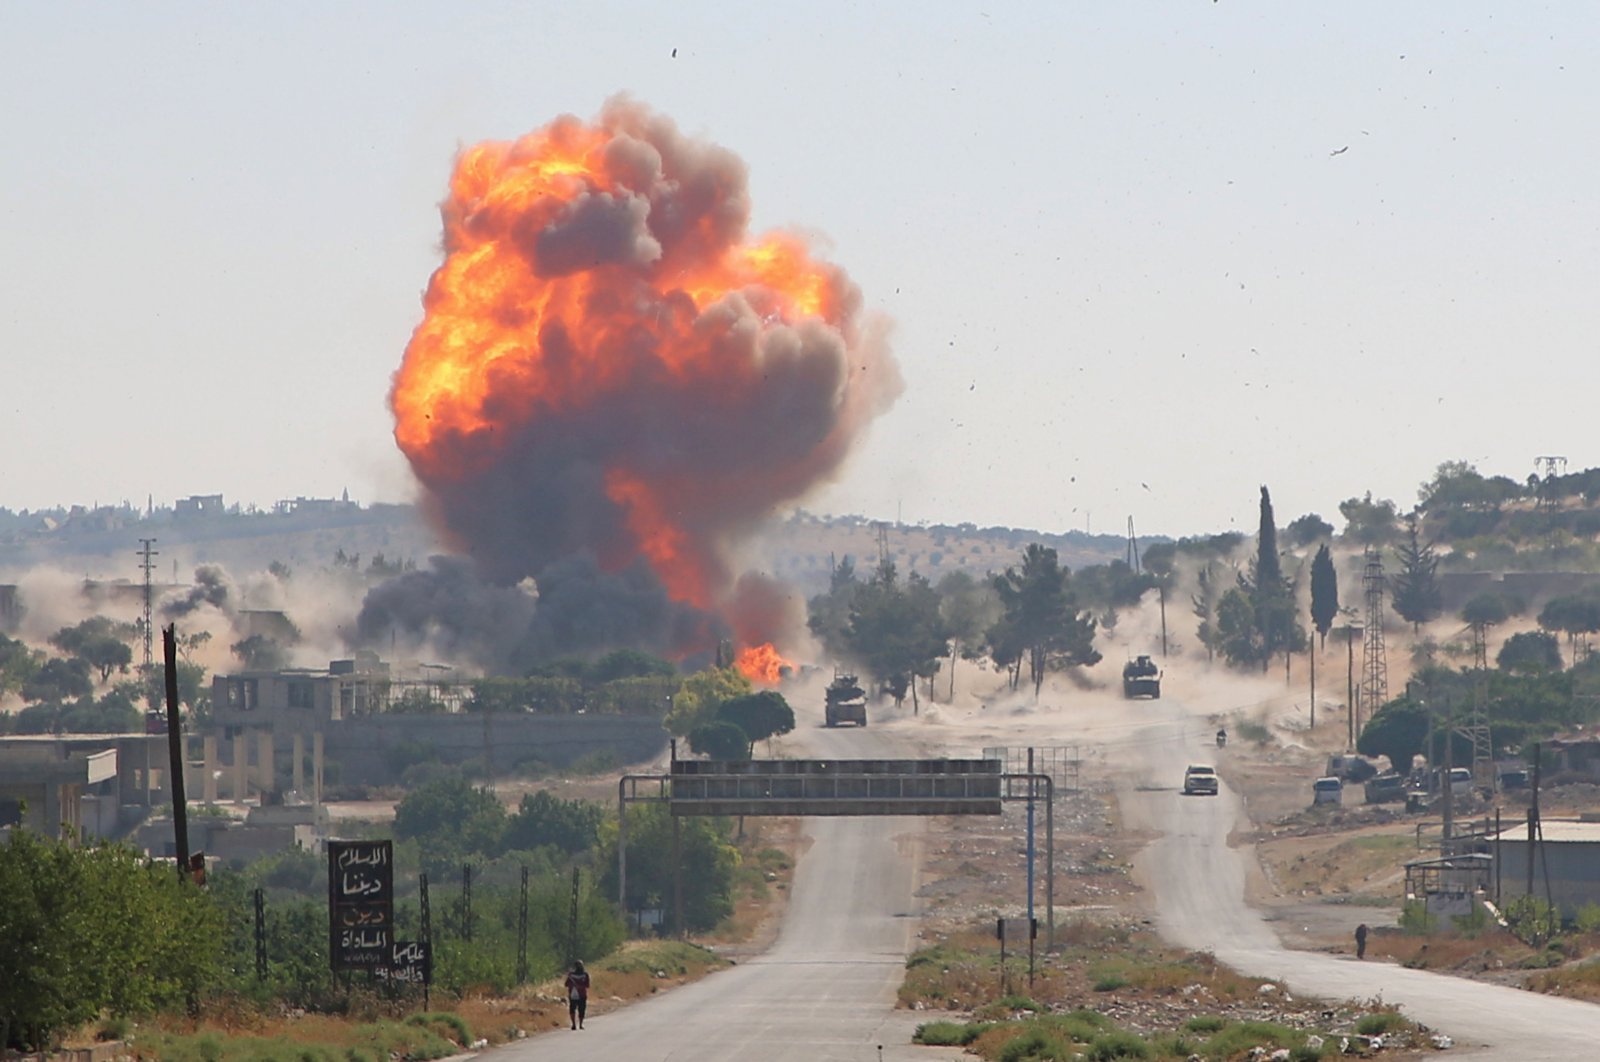 A fireball erupts from the site of an explosion reportedly targeting a joint Turkis-Russian patrol on the strategic M4 highway, near the Syrian town of Ariha in the opposition-held northwestern Idlib province, July 14, 2020. (AFP)